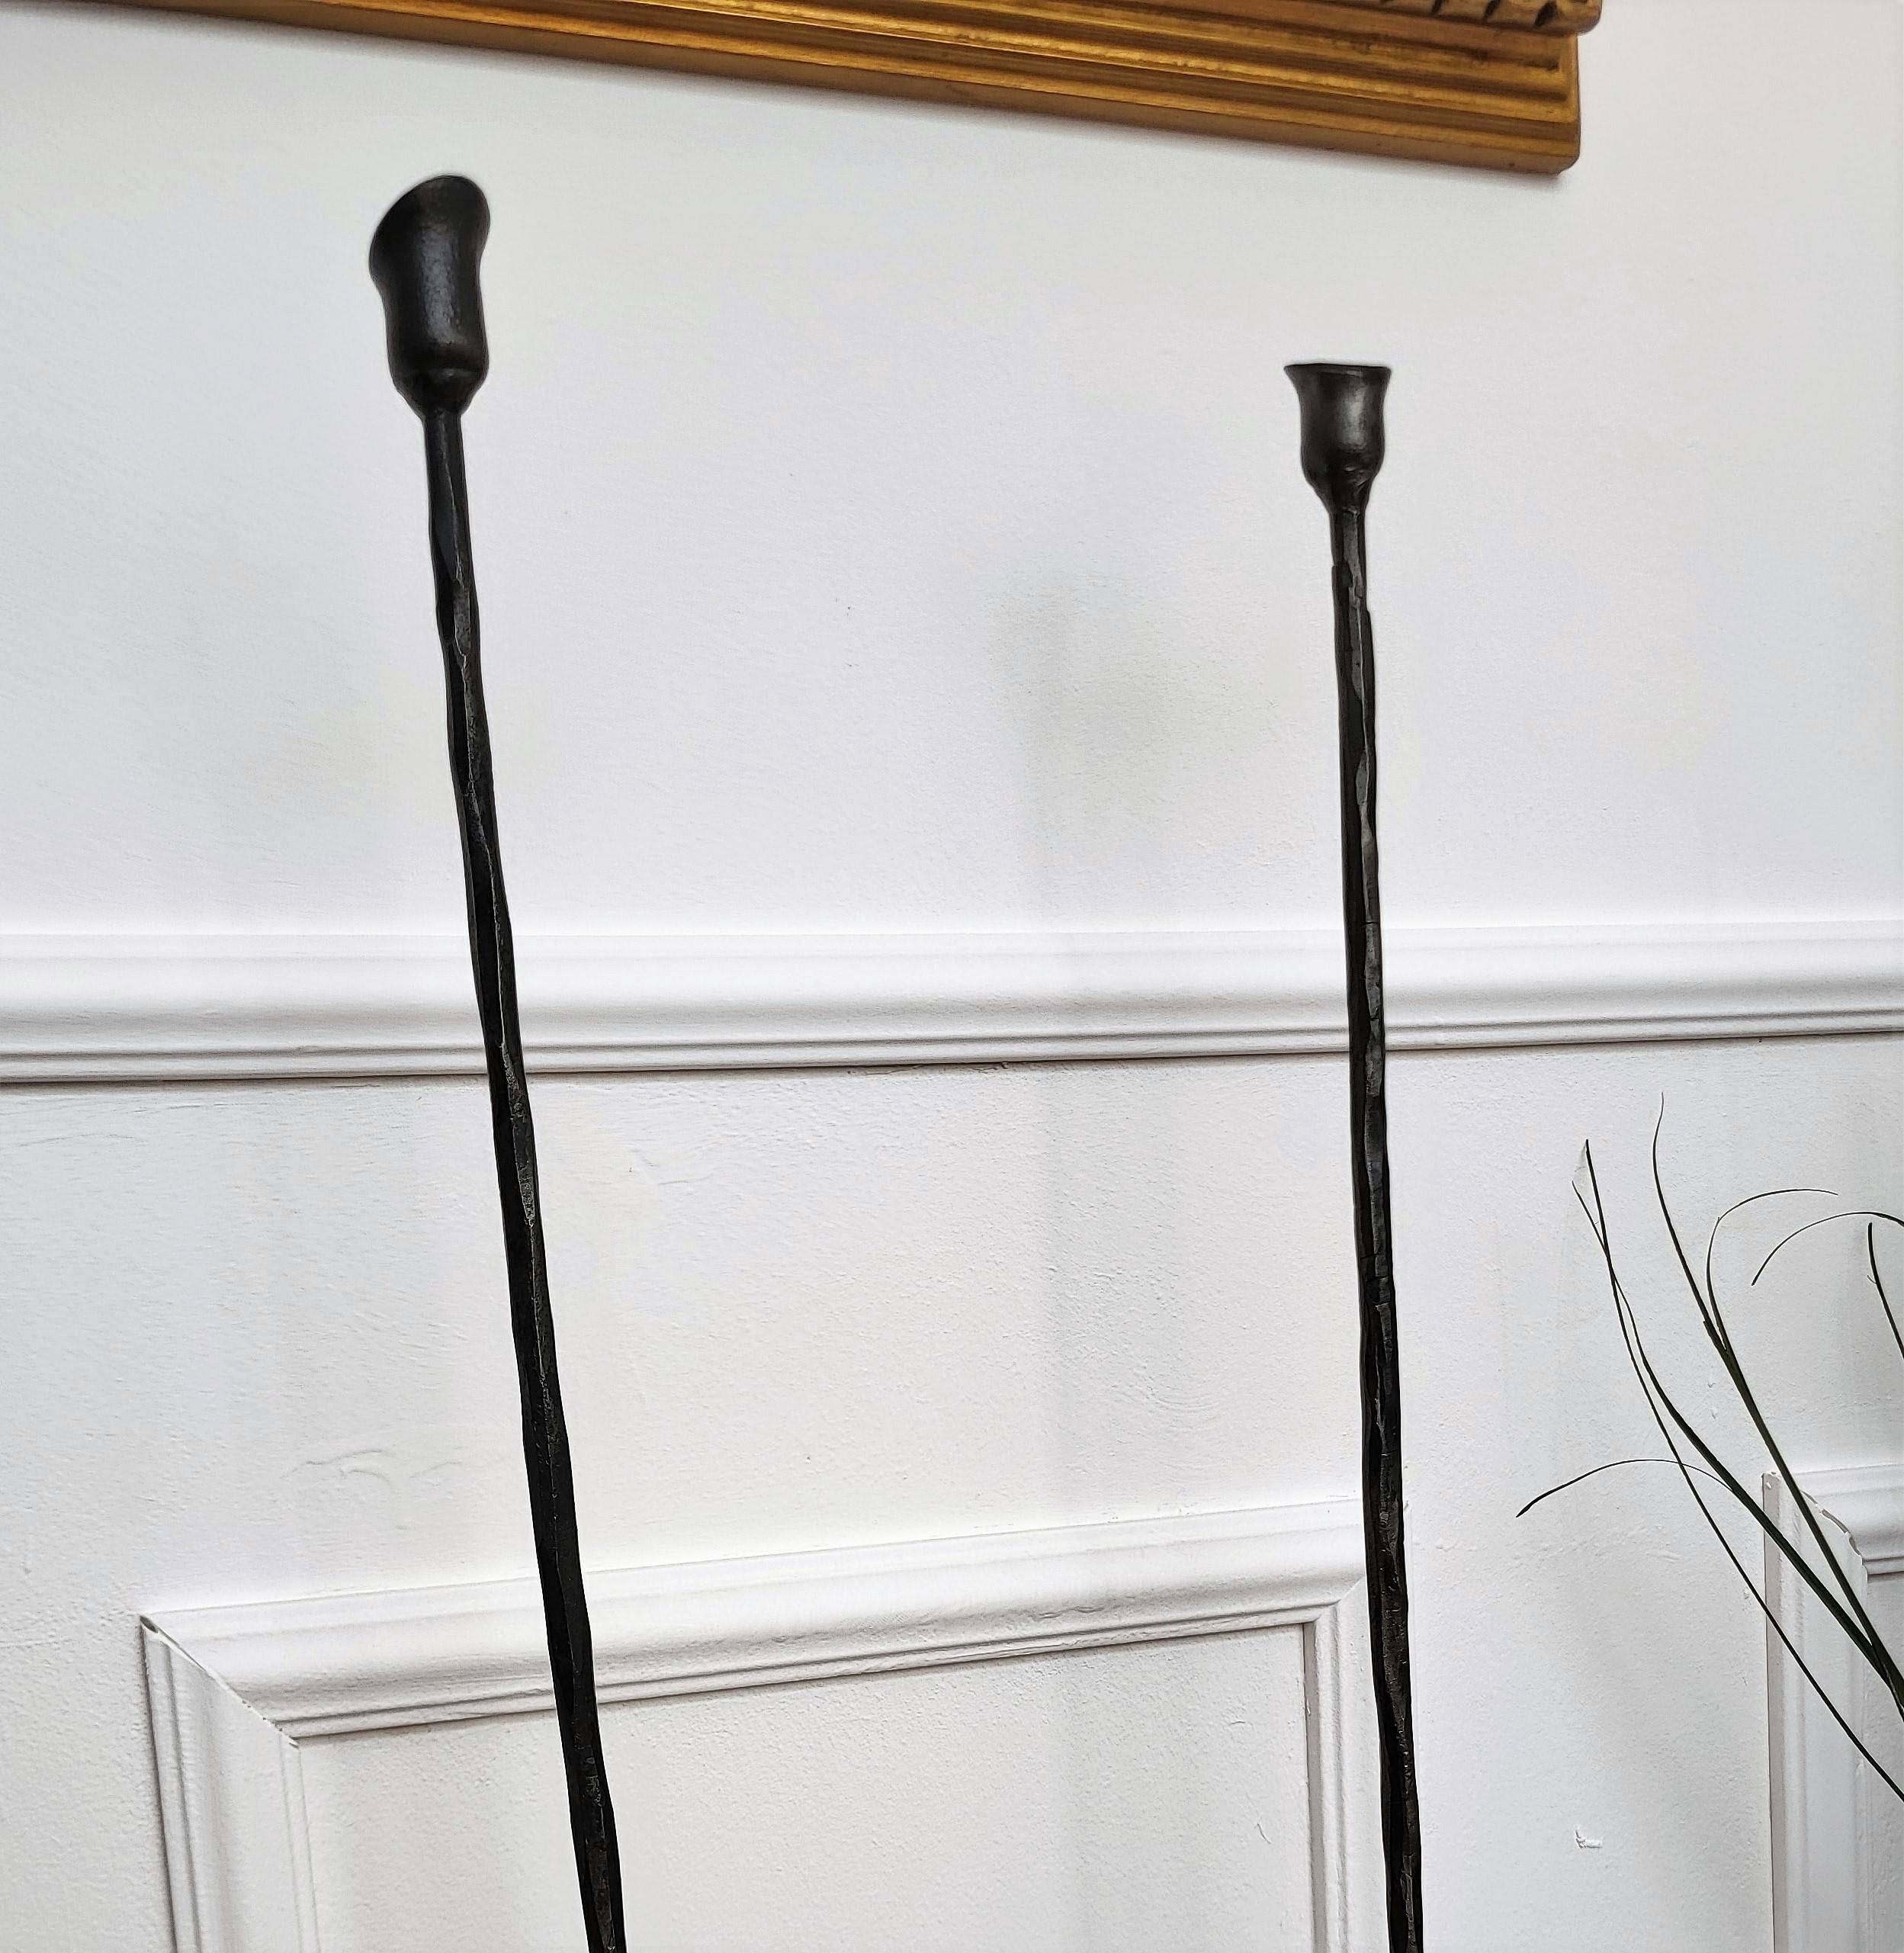 20th Century Pair of Wrought Iron Tall Floor Candle Holders in Brutalist Giacometti Style For Sale